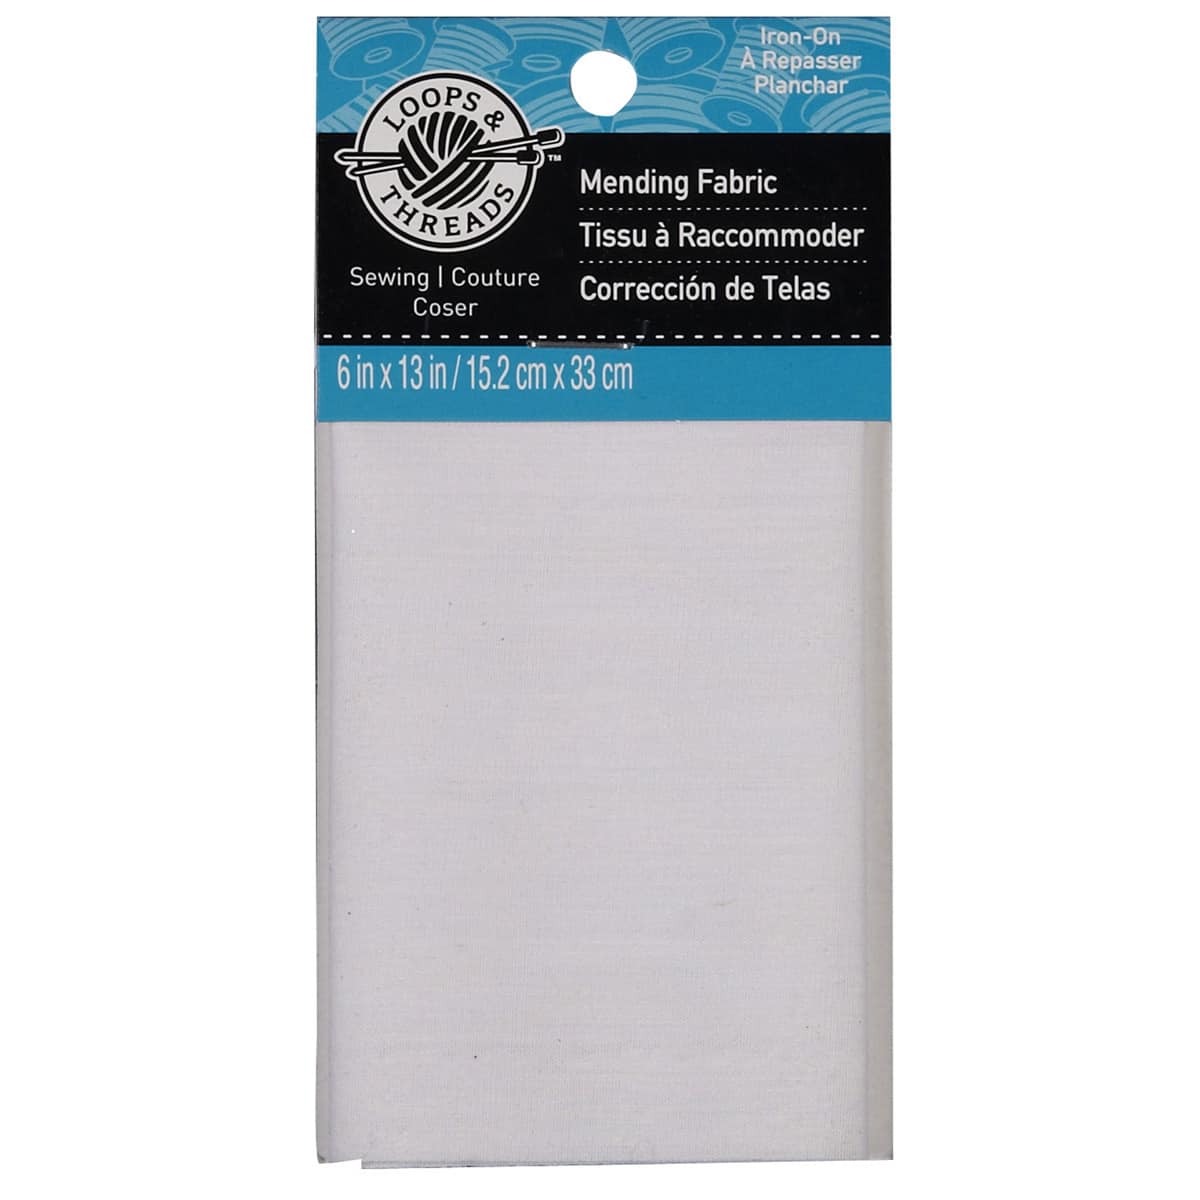 Iron-On Mending Fabric by Loops & Threads in White | 6 x 13 | Michaels